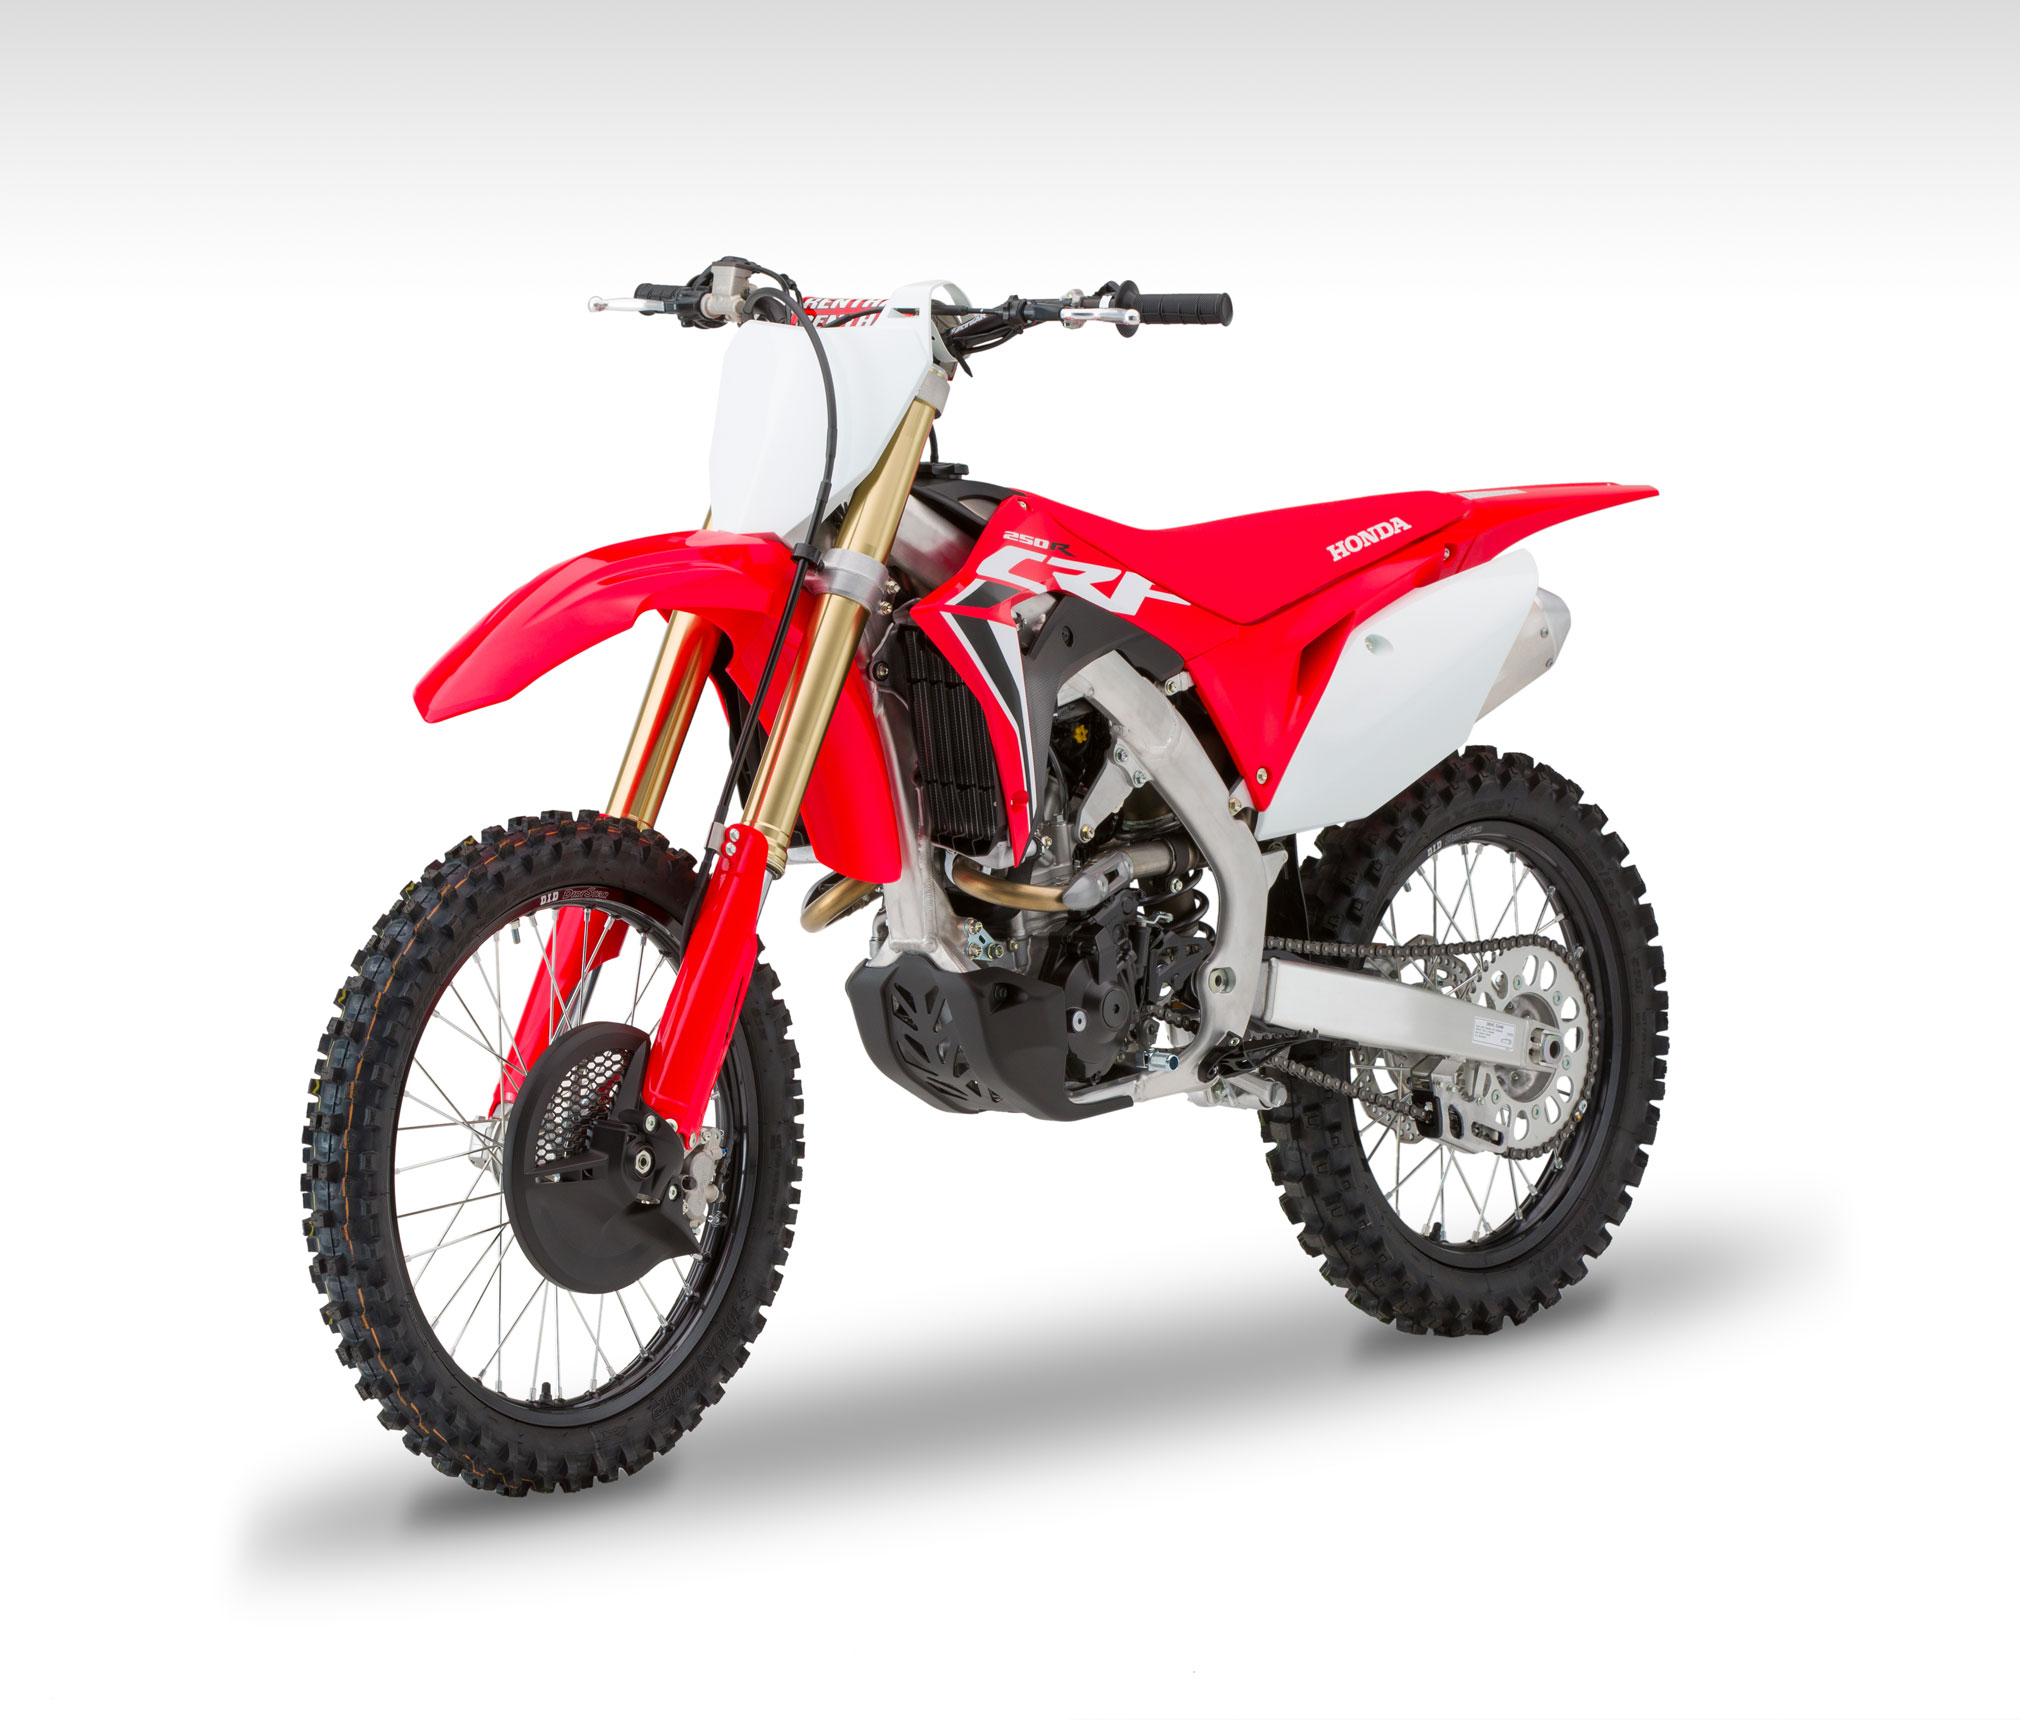 2020 CRF250R Guide • Total